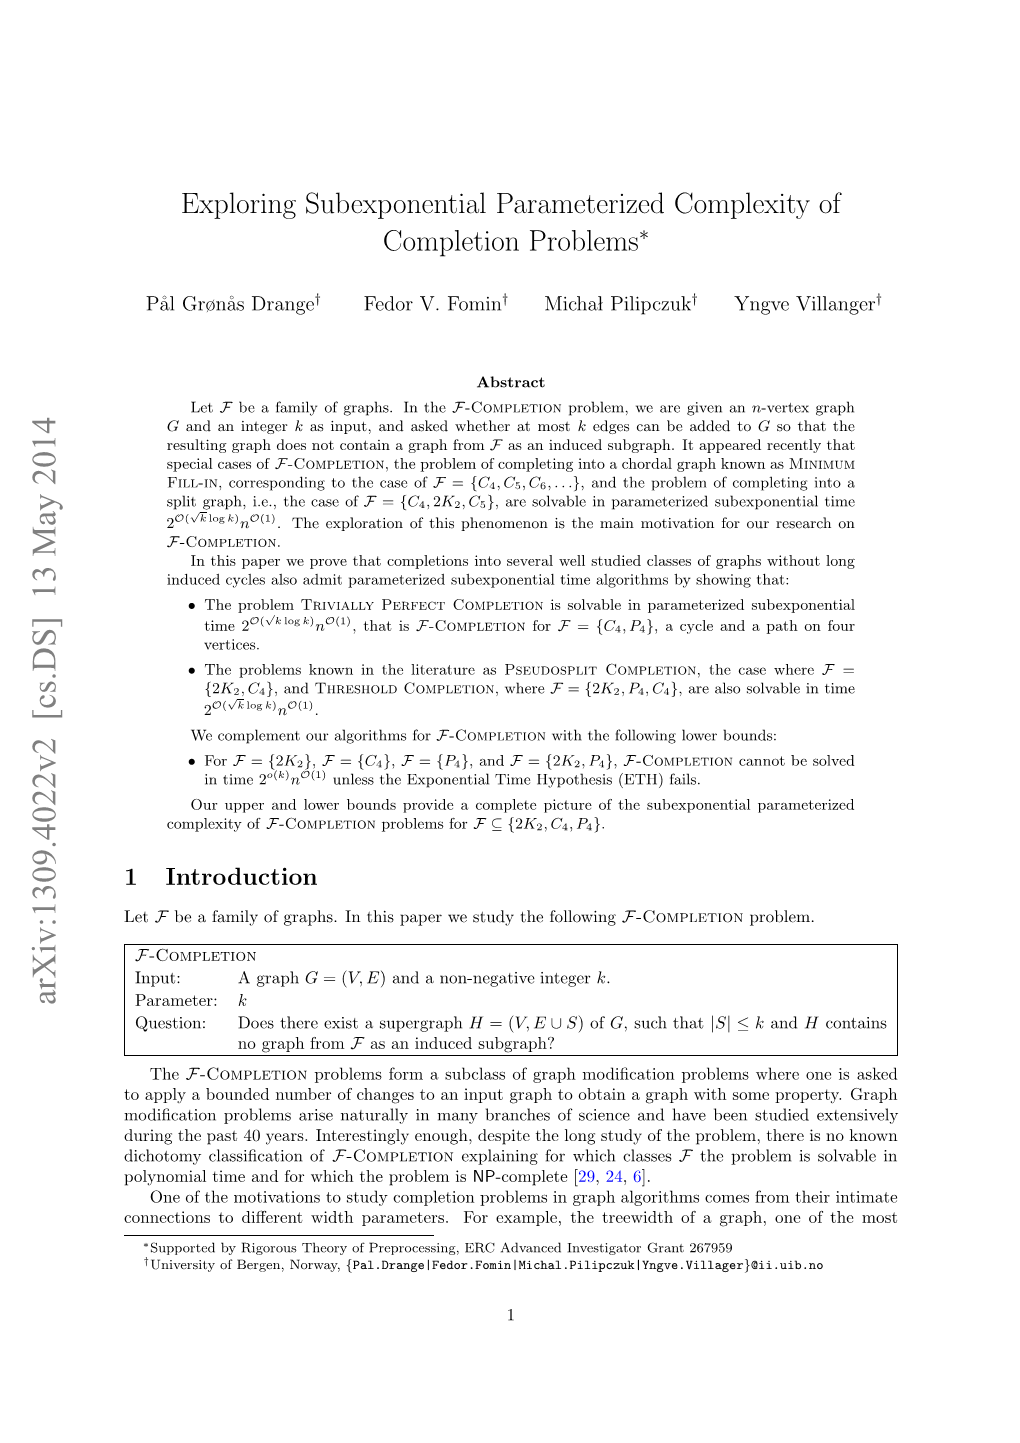 Exploring Subexponential Parameterized Complexity of Completion Problems